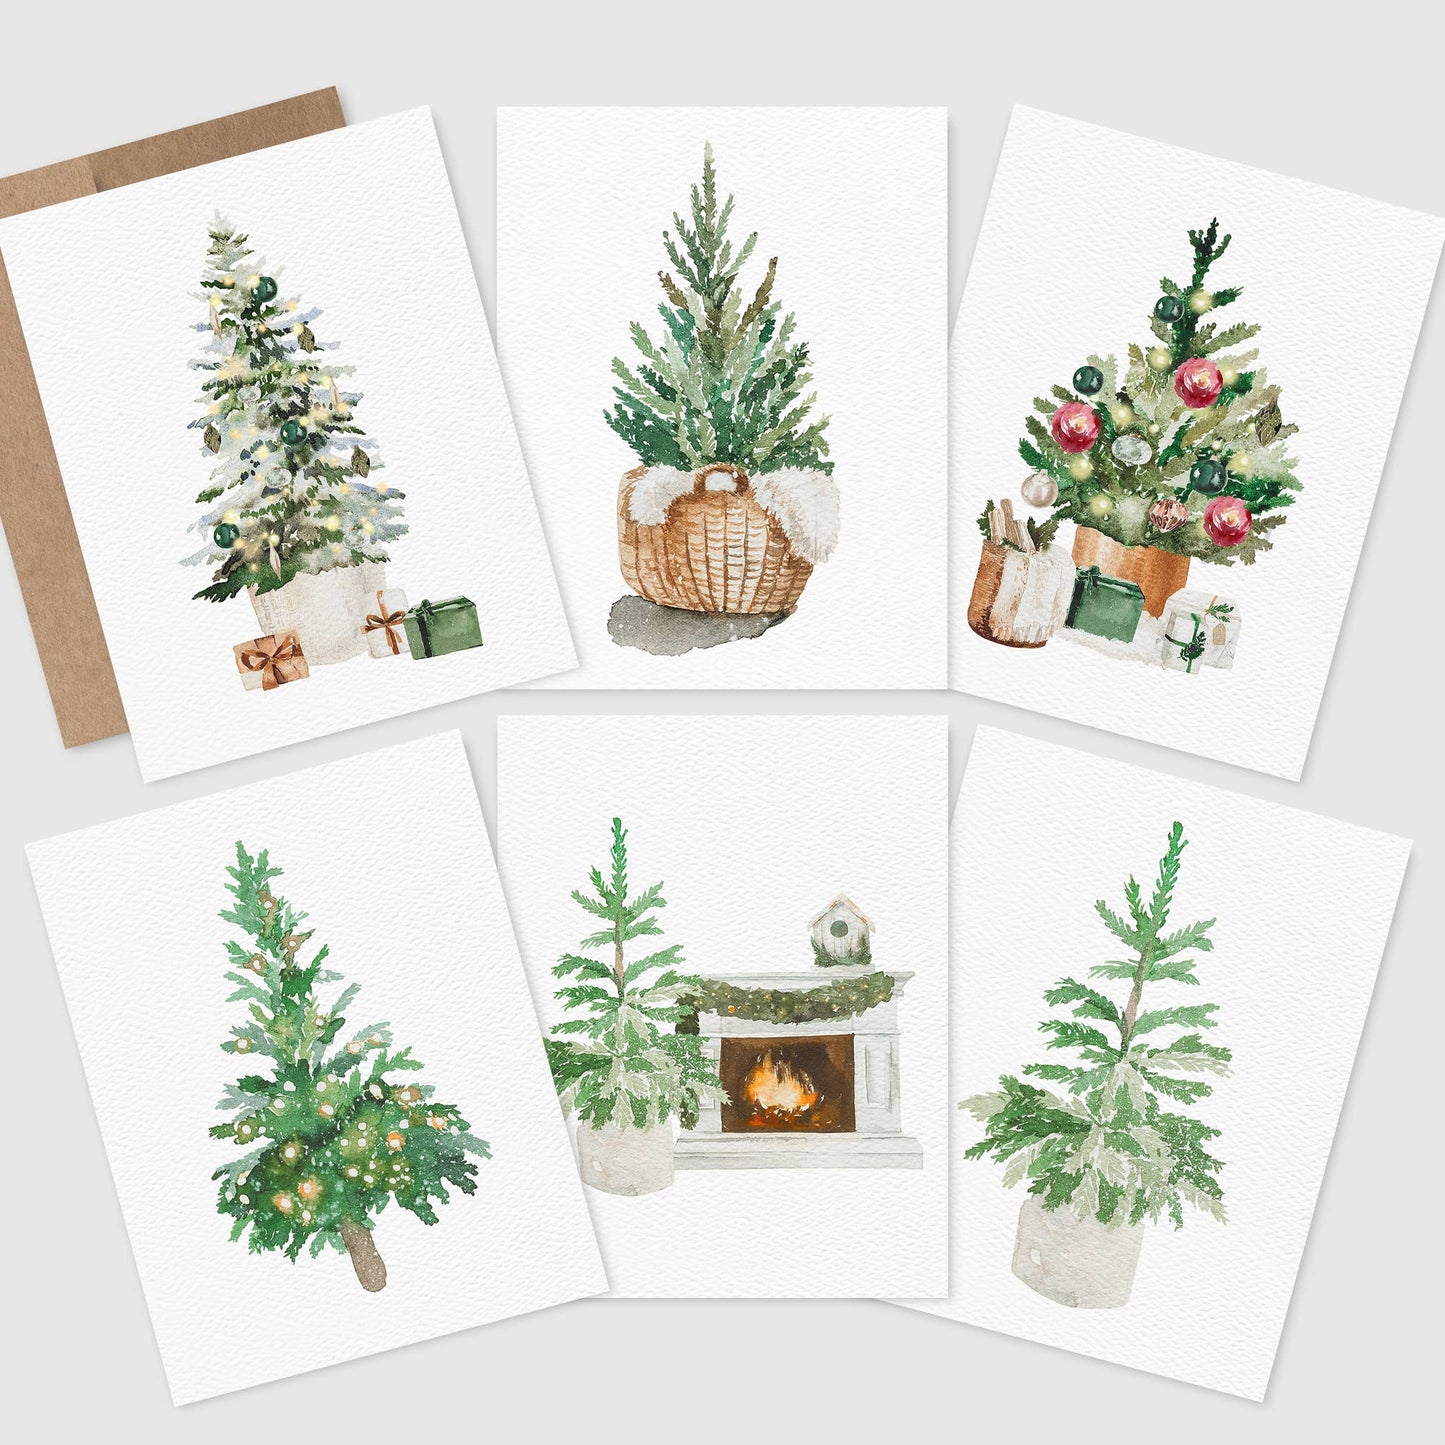 Boxed Set of Christmas Tree Cards